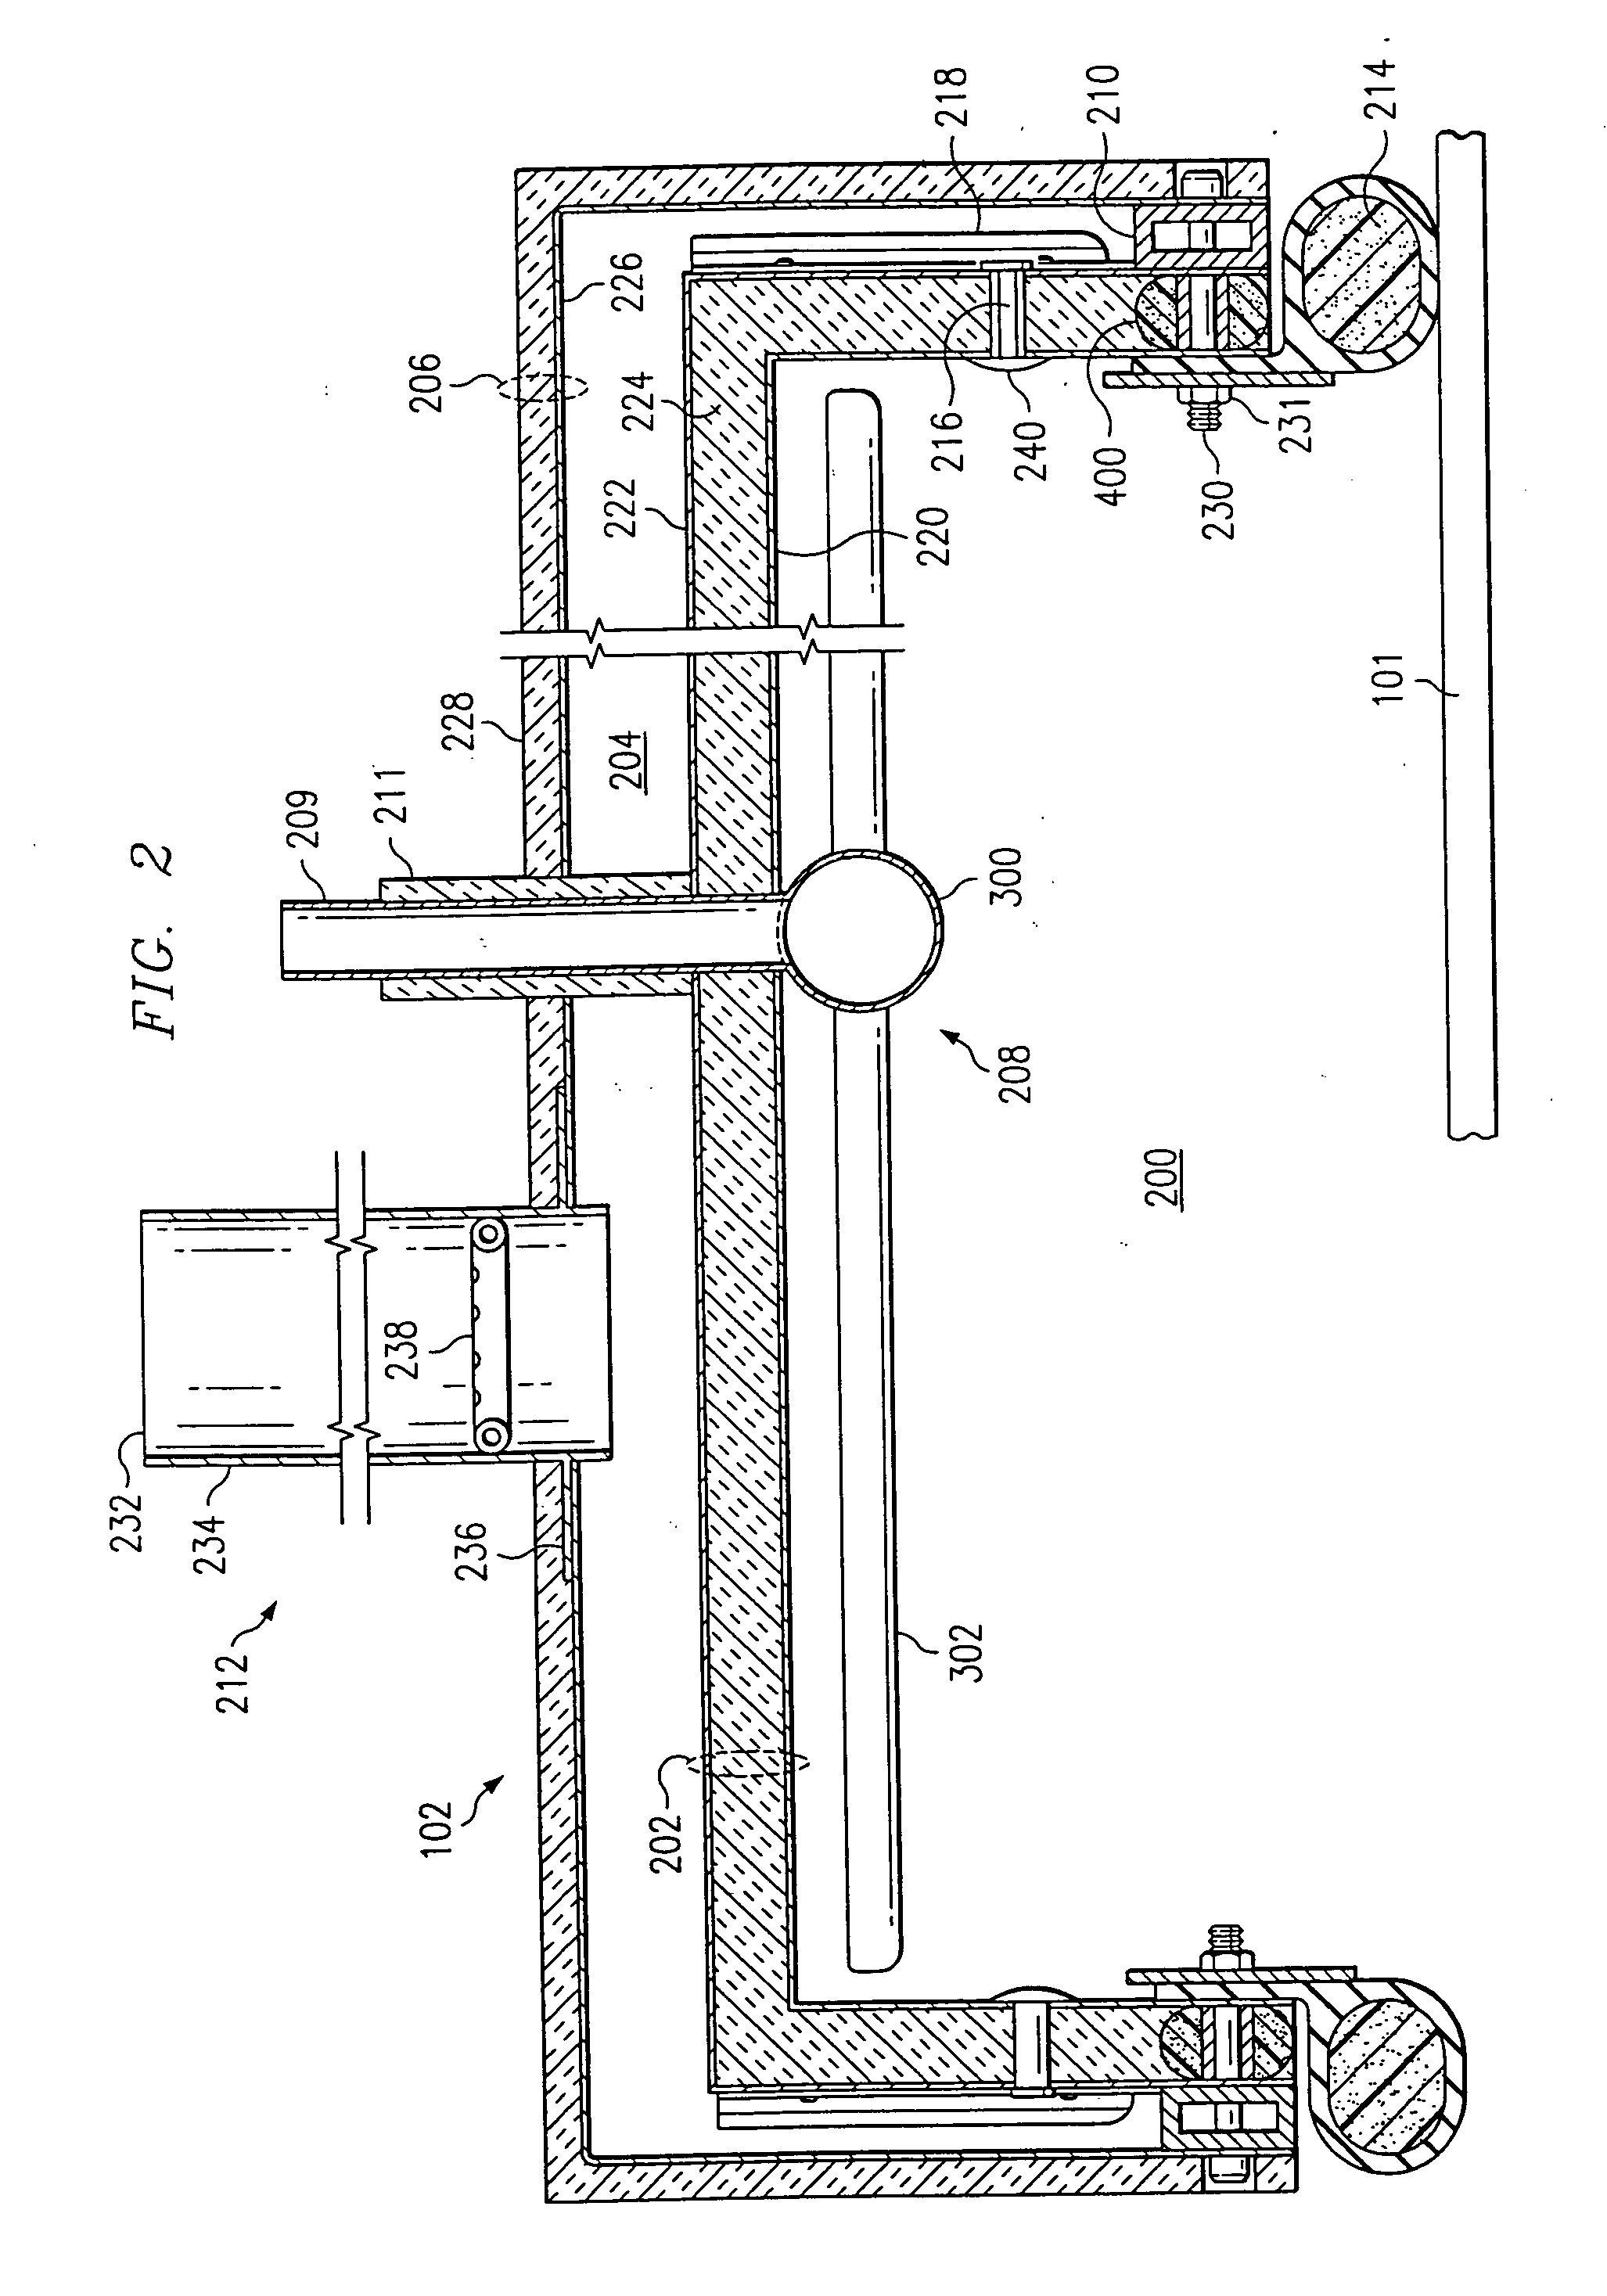 System and method for curing composite material